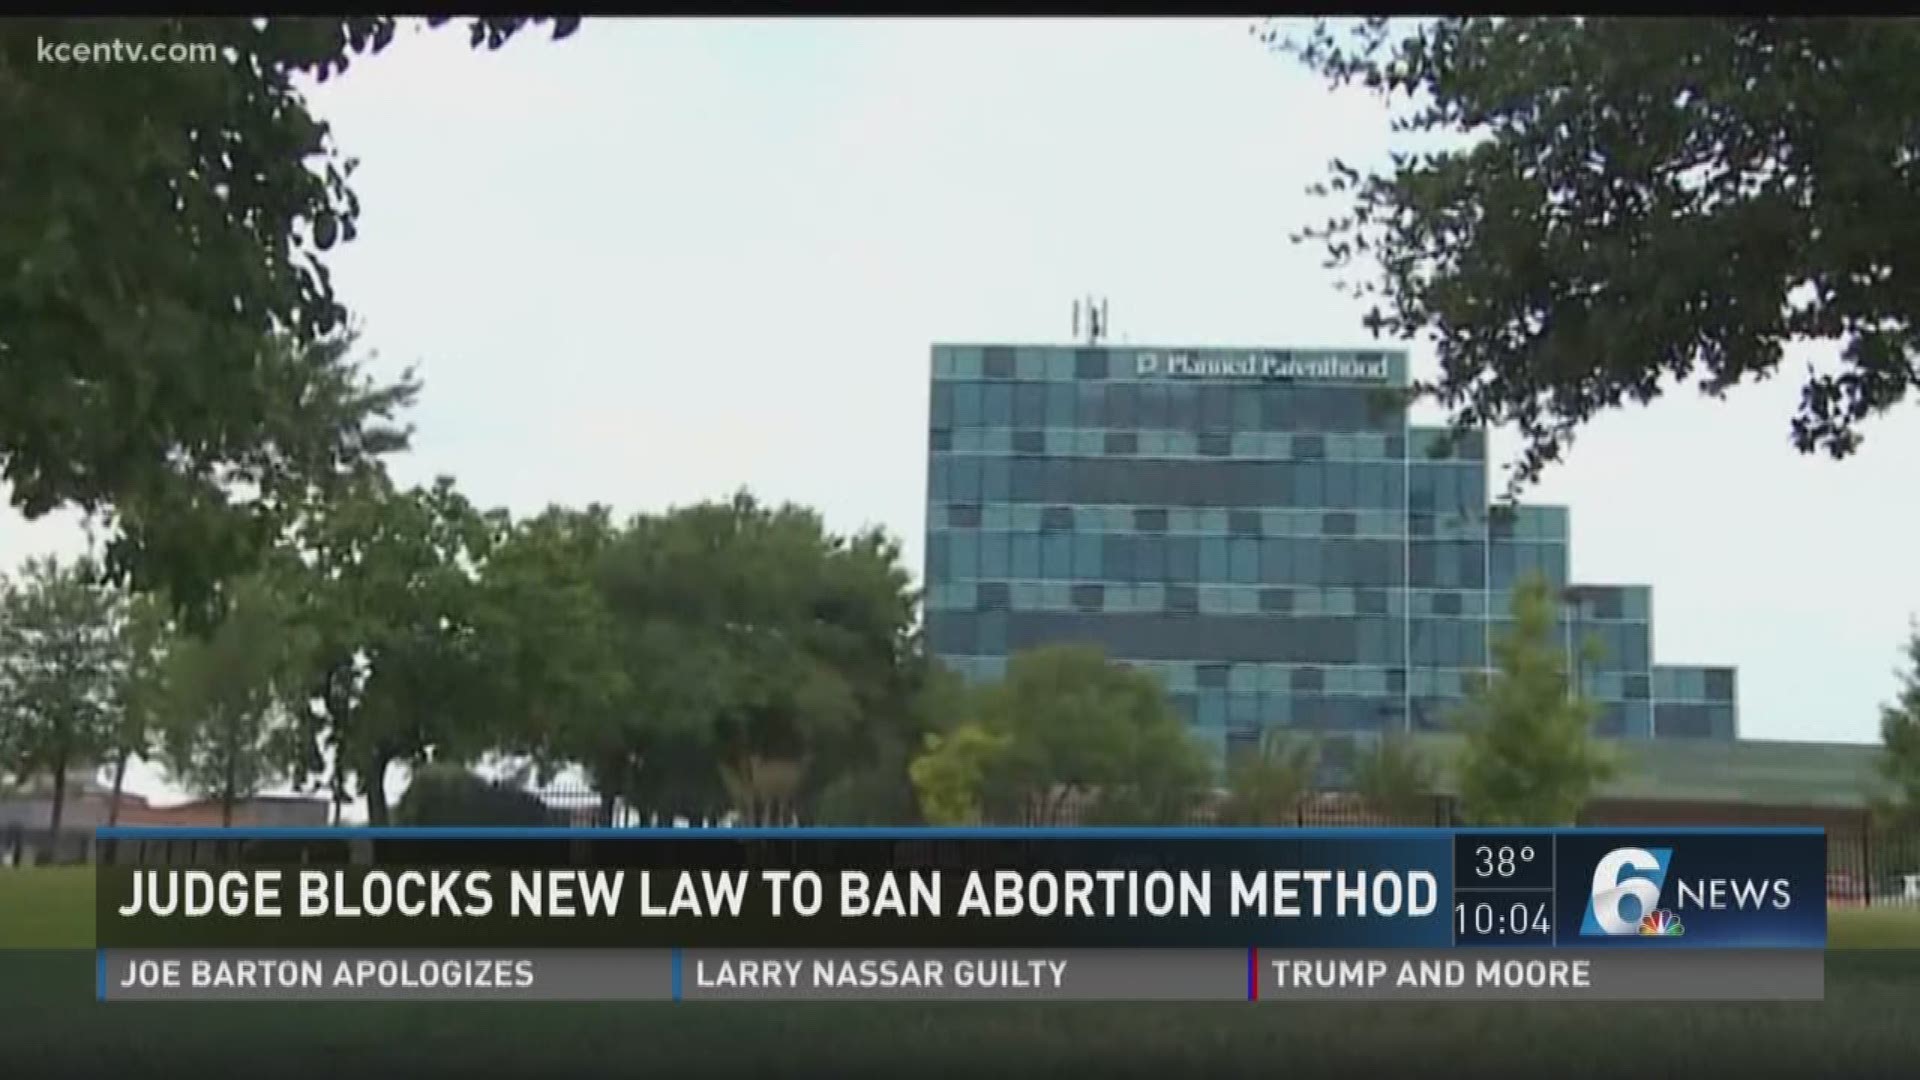 A federal judge blocked a new state law seeking to ban a commonly used abortion method. 